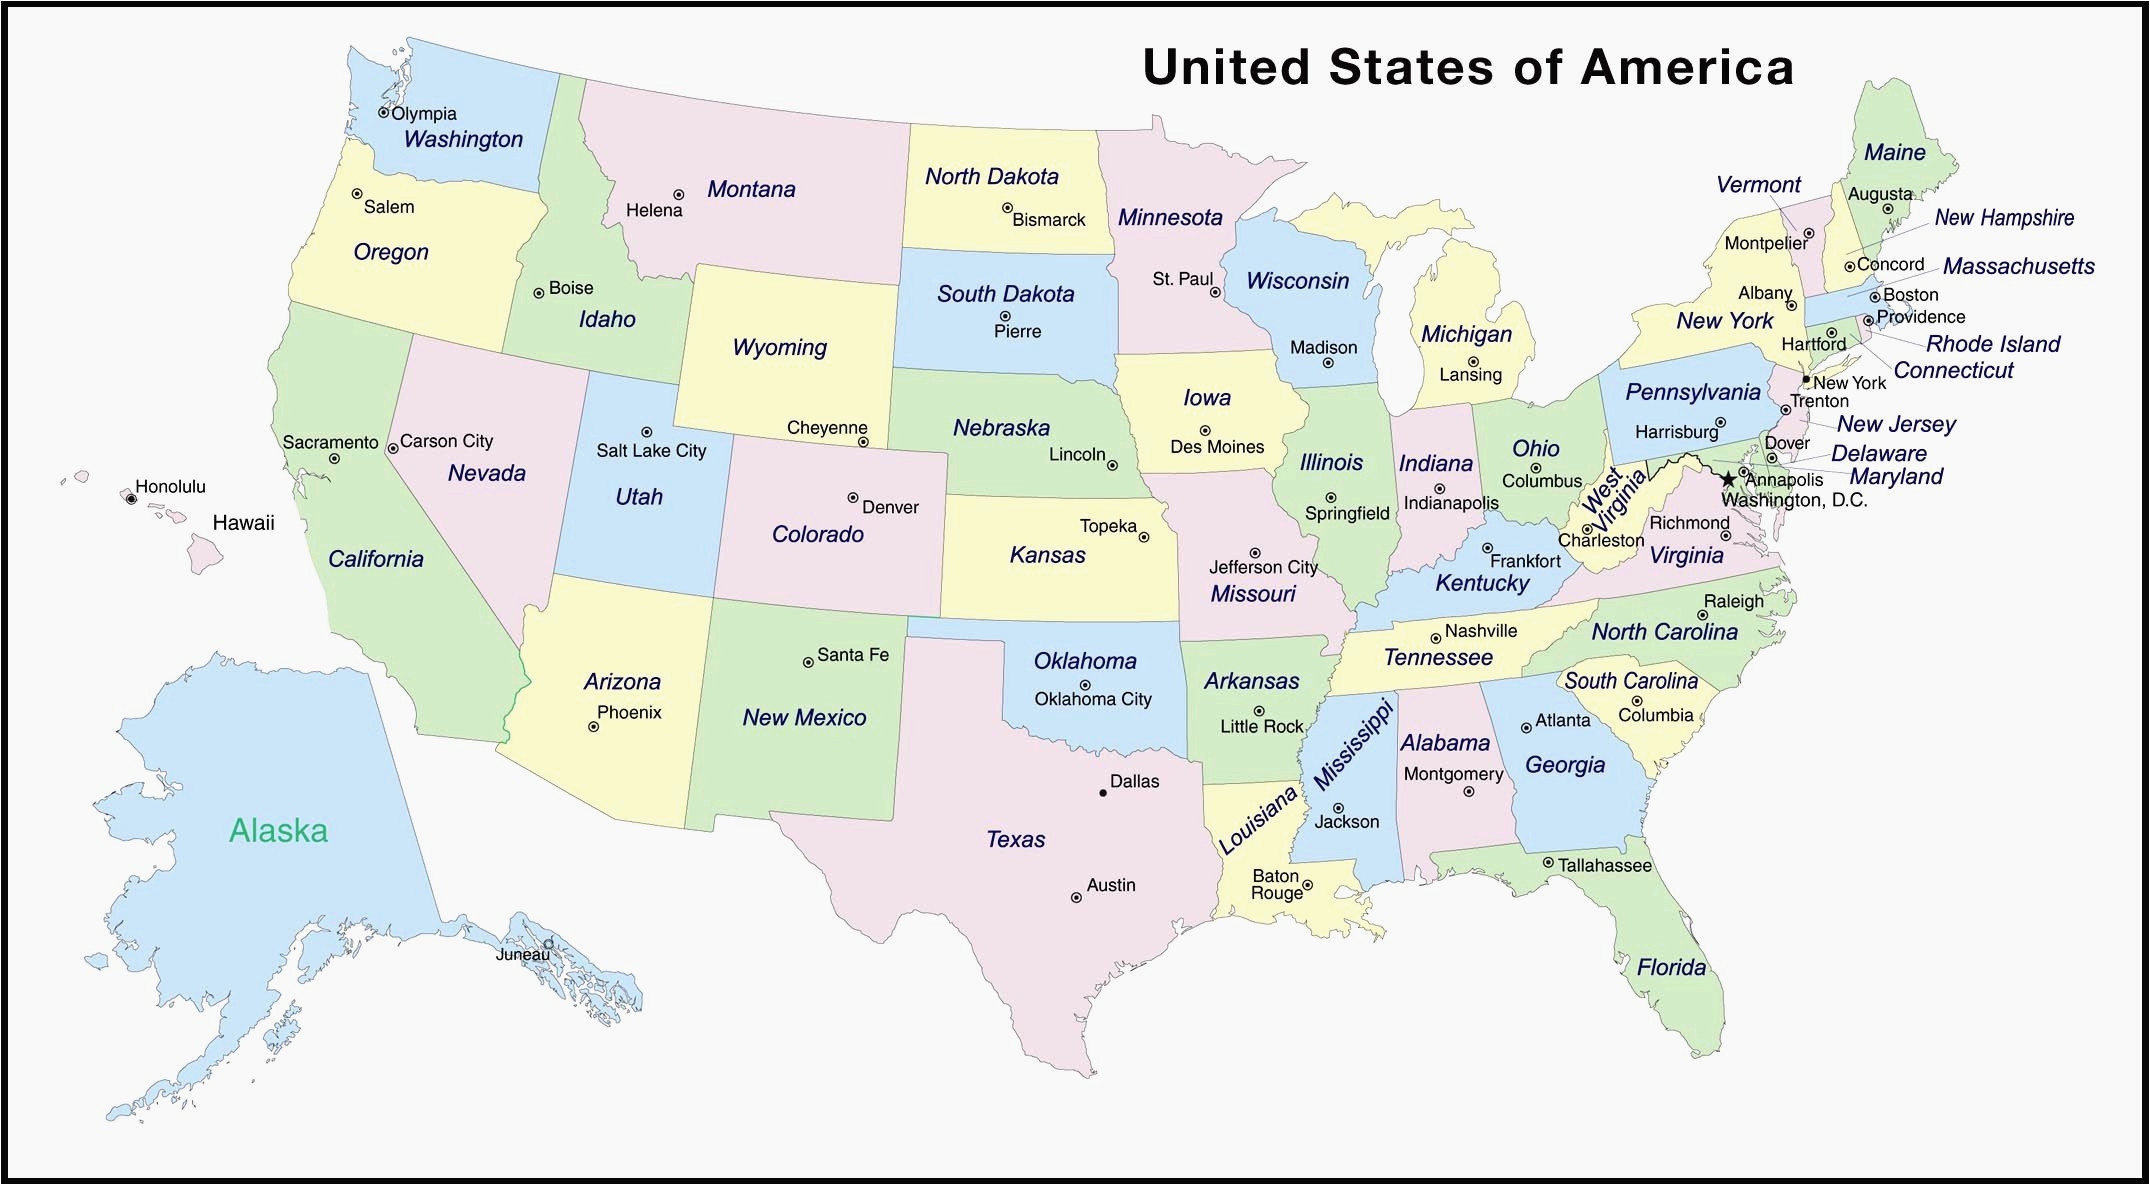 Tennessee Major Cities Map Map Of Nevada and California with Cities United States area Codes